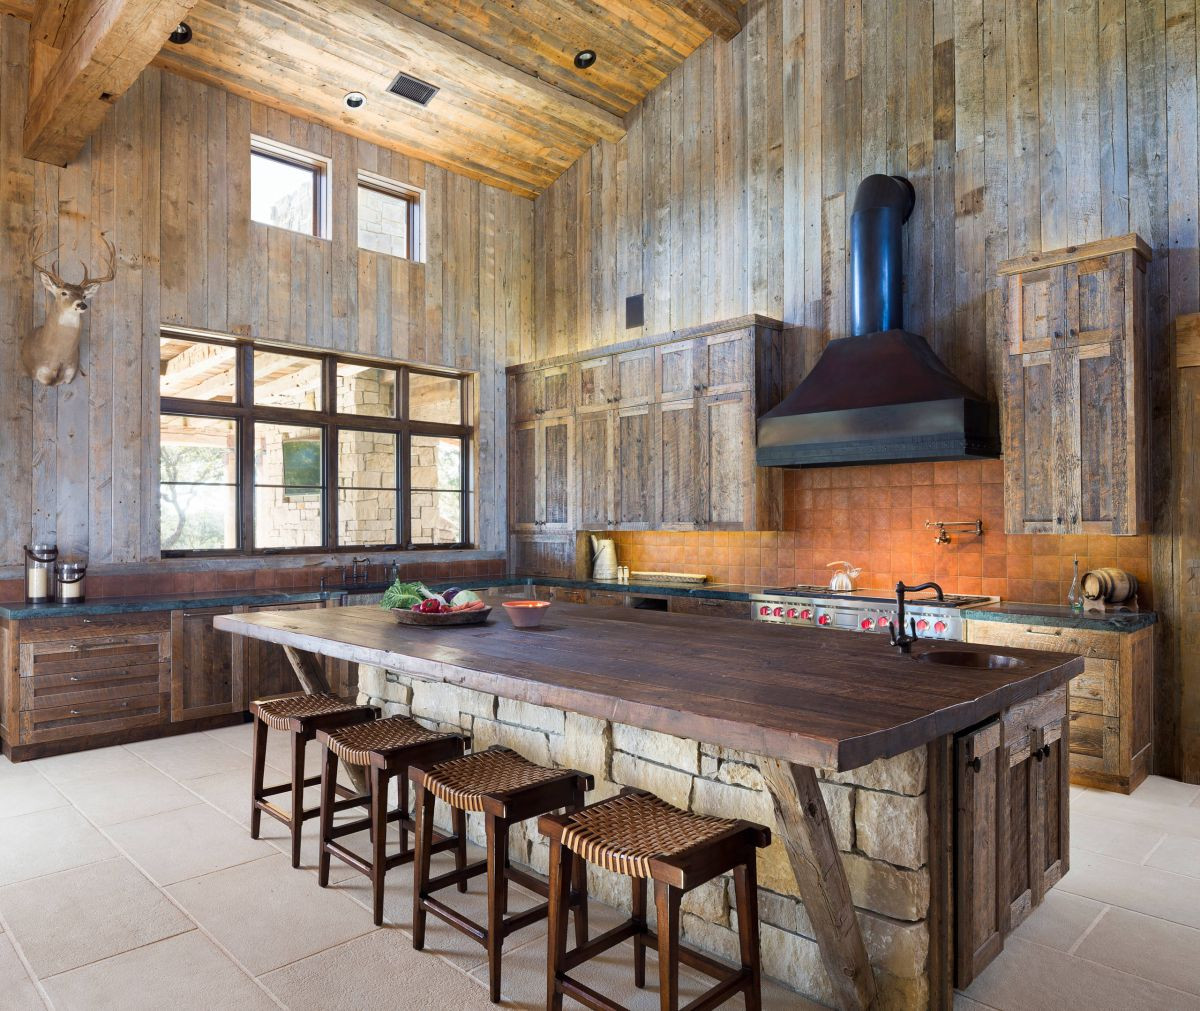 Rustic Kitchen Islands
 15 Rustic Kitchen Islands Perfect for Any Kitchen